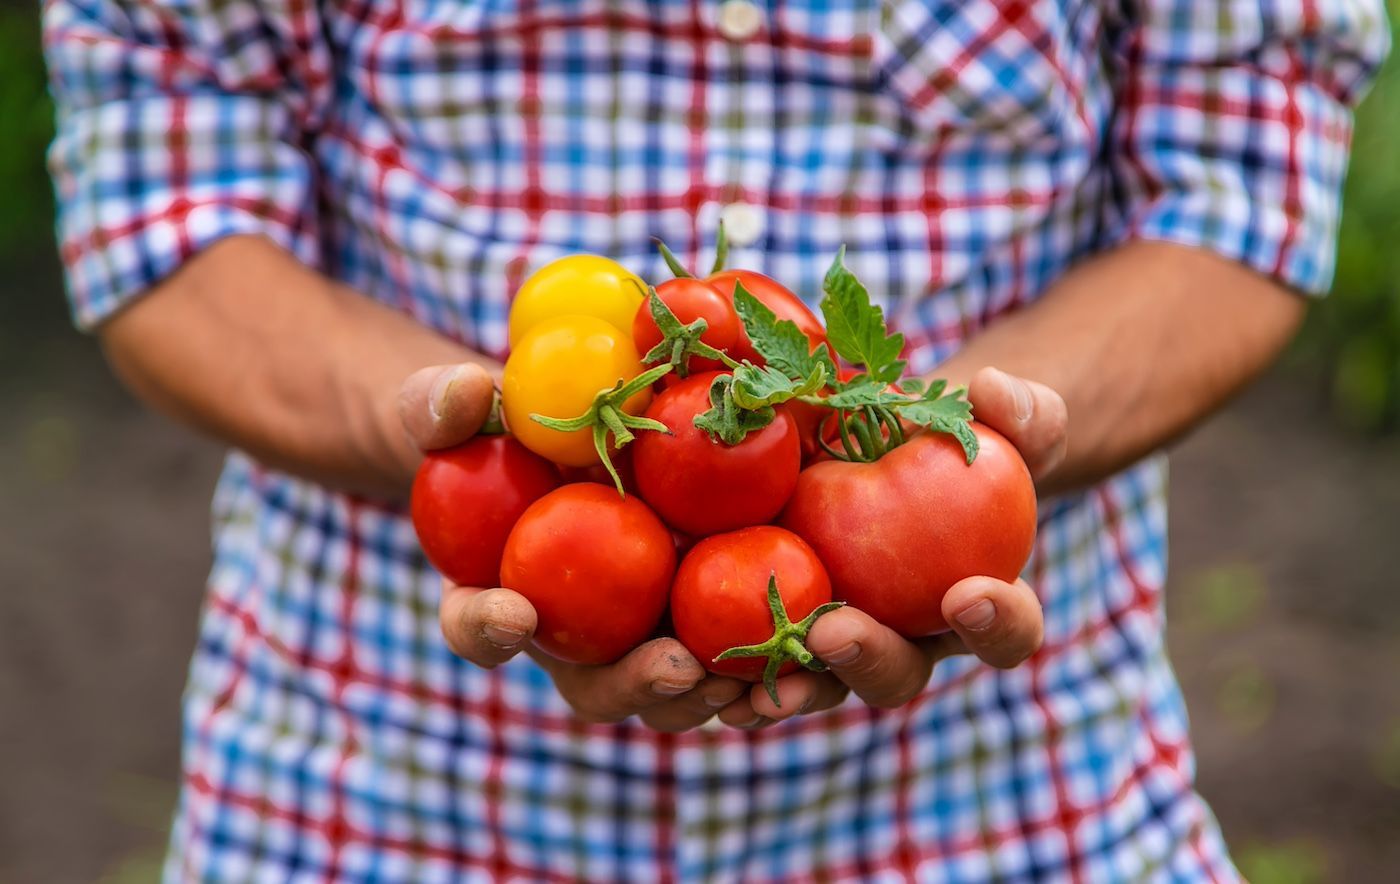 Tasty Tomatoes Are a Great Addition to Any Dish & Diet. Learn More From Chews Your Health.